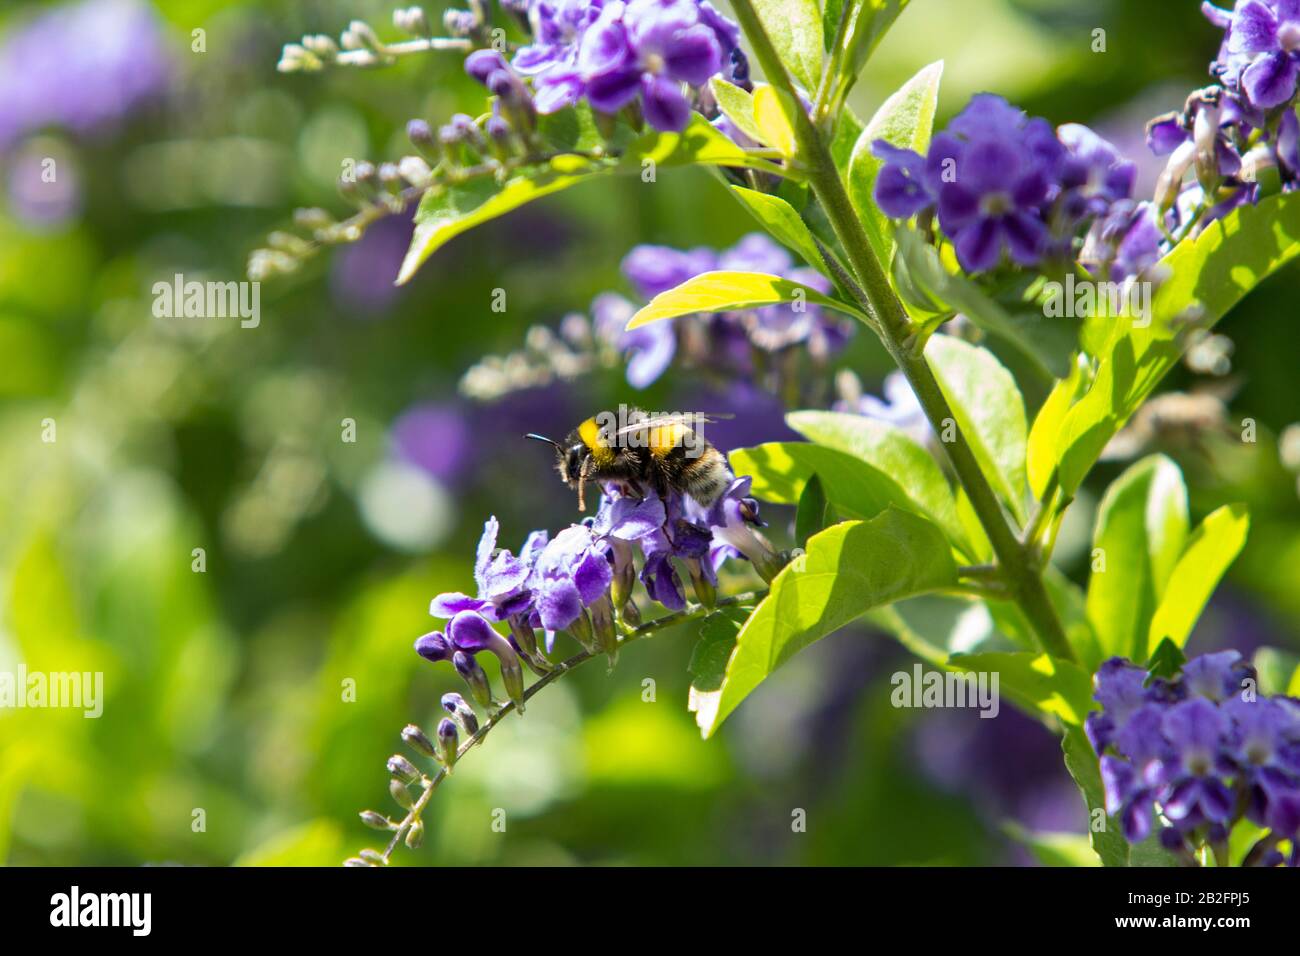 Close up of a Bumblebee enjoying tiny purple flowers on a sunny day. Stock Photo